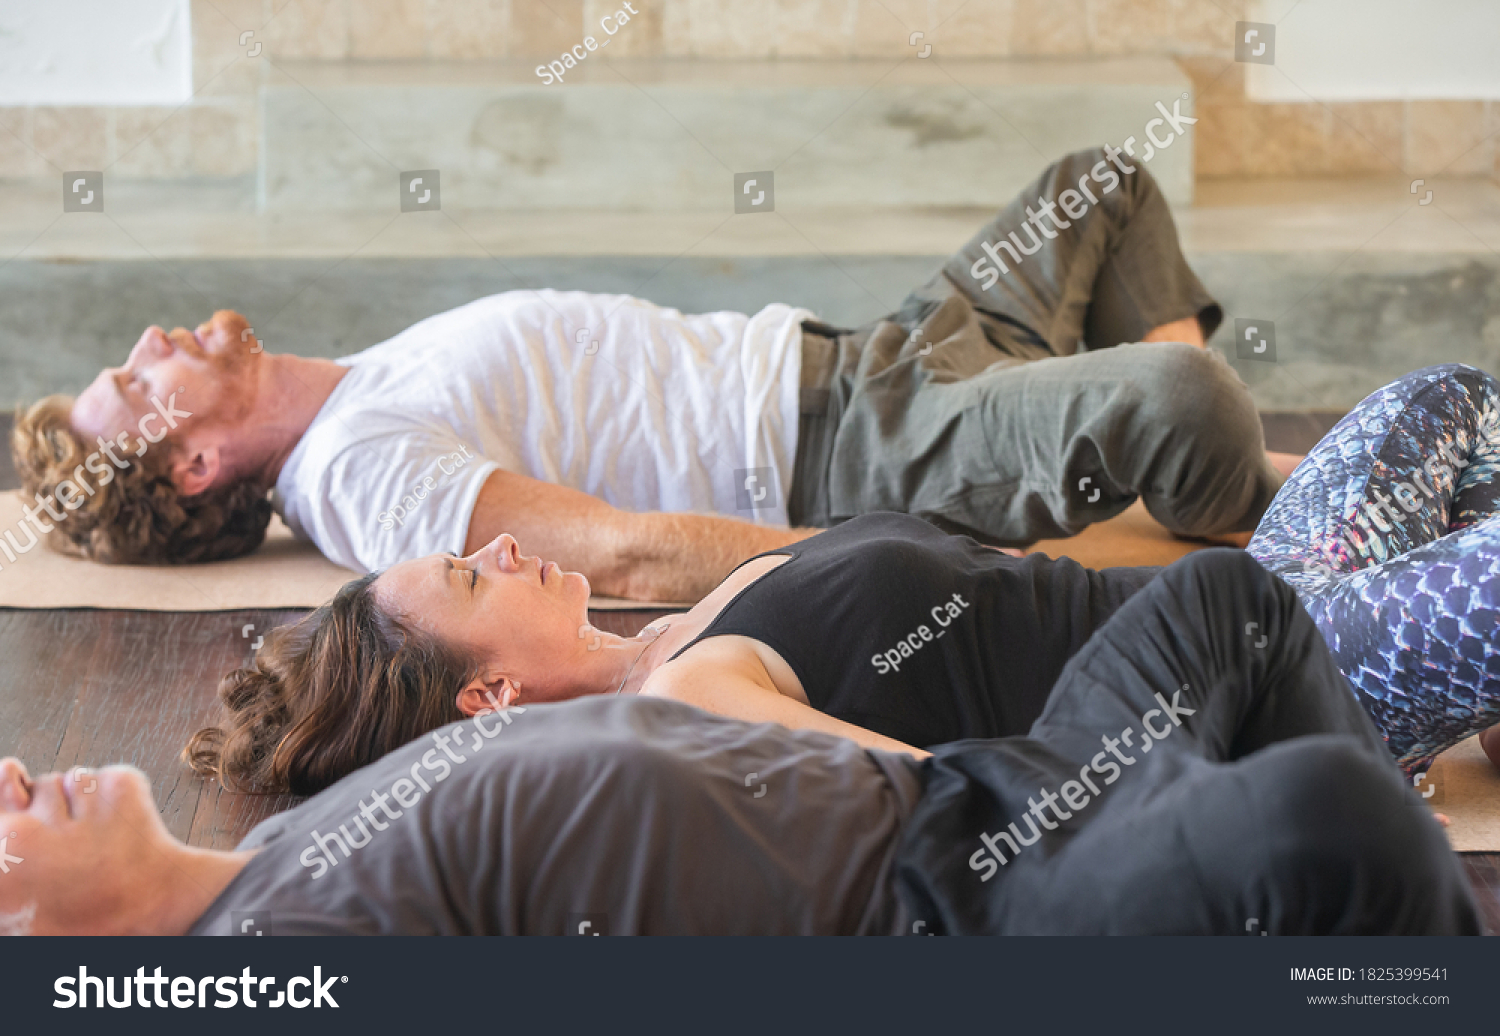 Diverse group of people on wooden floor practicing yoga lying in Reclined Butterfly exercise relaxing after practice. Healthy lifestyle concept #1825399541